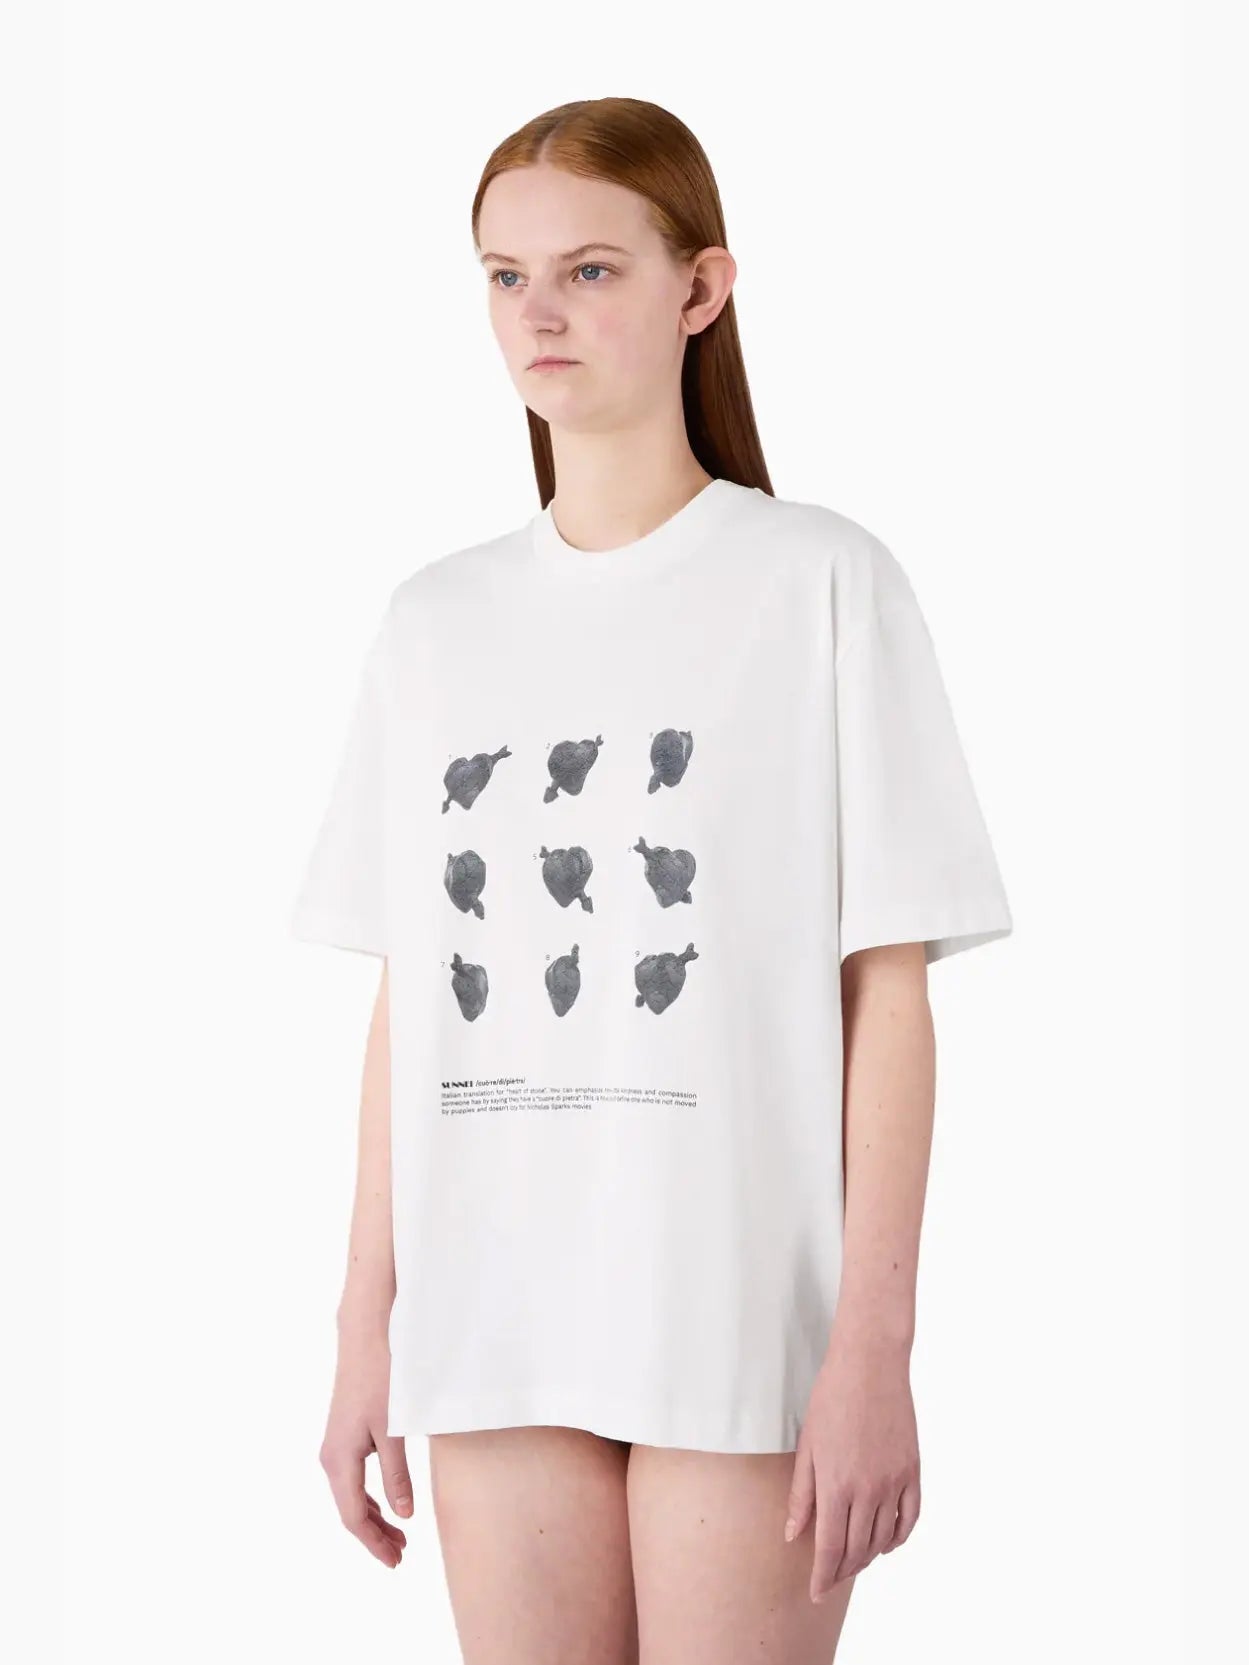 A white short-sleeved Classic T-Shirt "Cuori di Pietra" by Sunnei with a minimalist design featuring nine black abstract shapes arranged in a grid pattern on the front. There is text below the shapes. Available exclusively at Bassalstore, your go-to store in Barcelona.